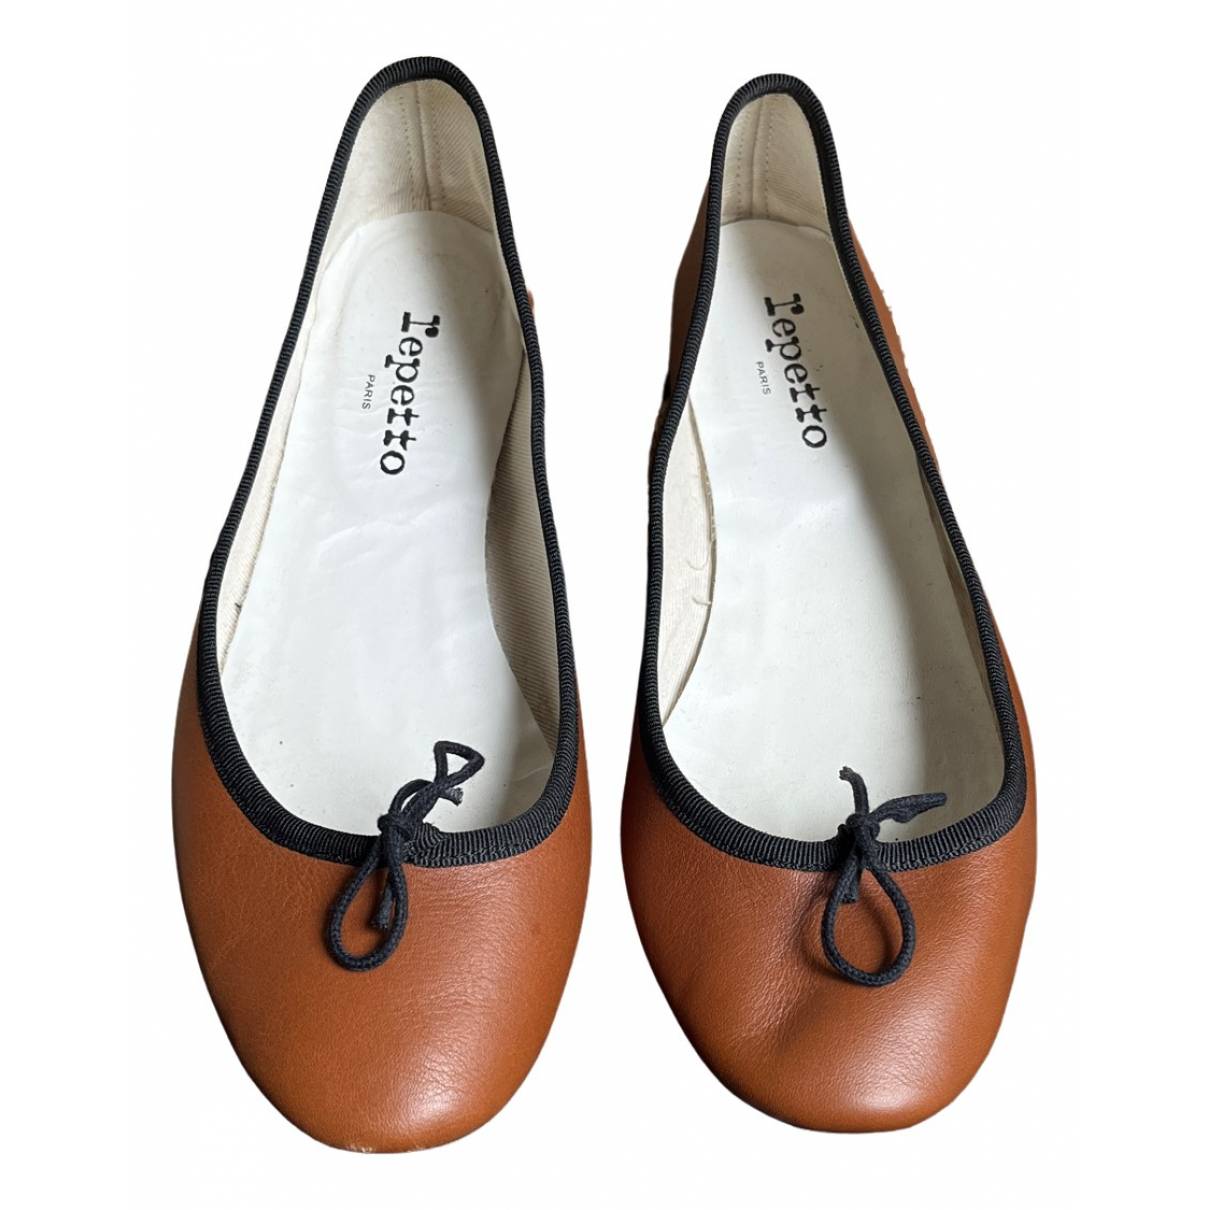 Leather ballet flats Repetto Brown size 41 EU in Leather - 36605893